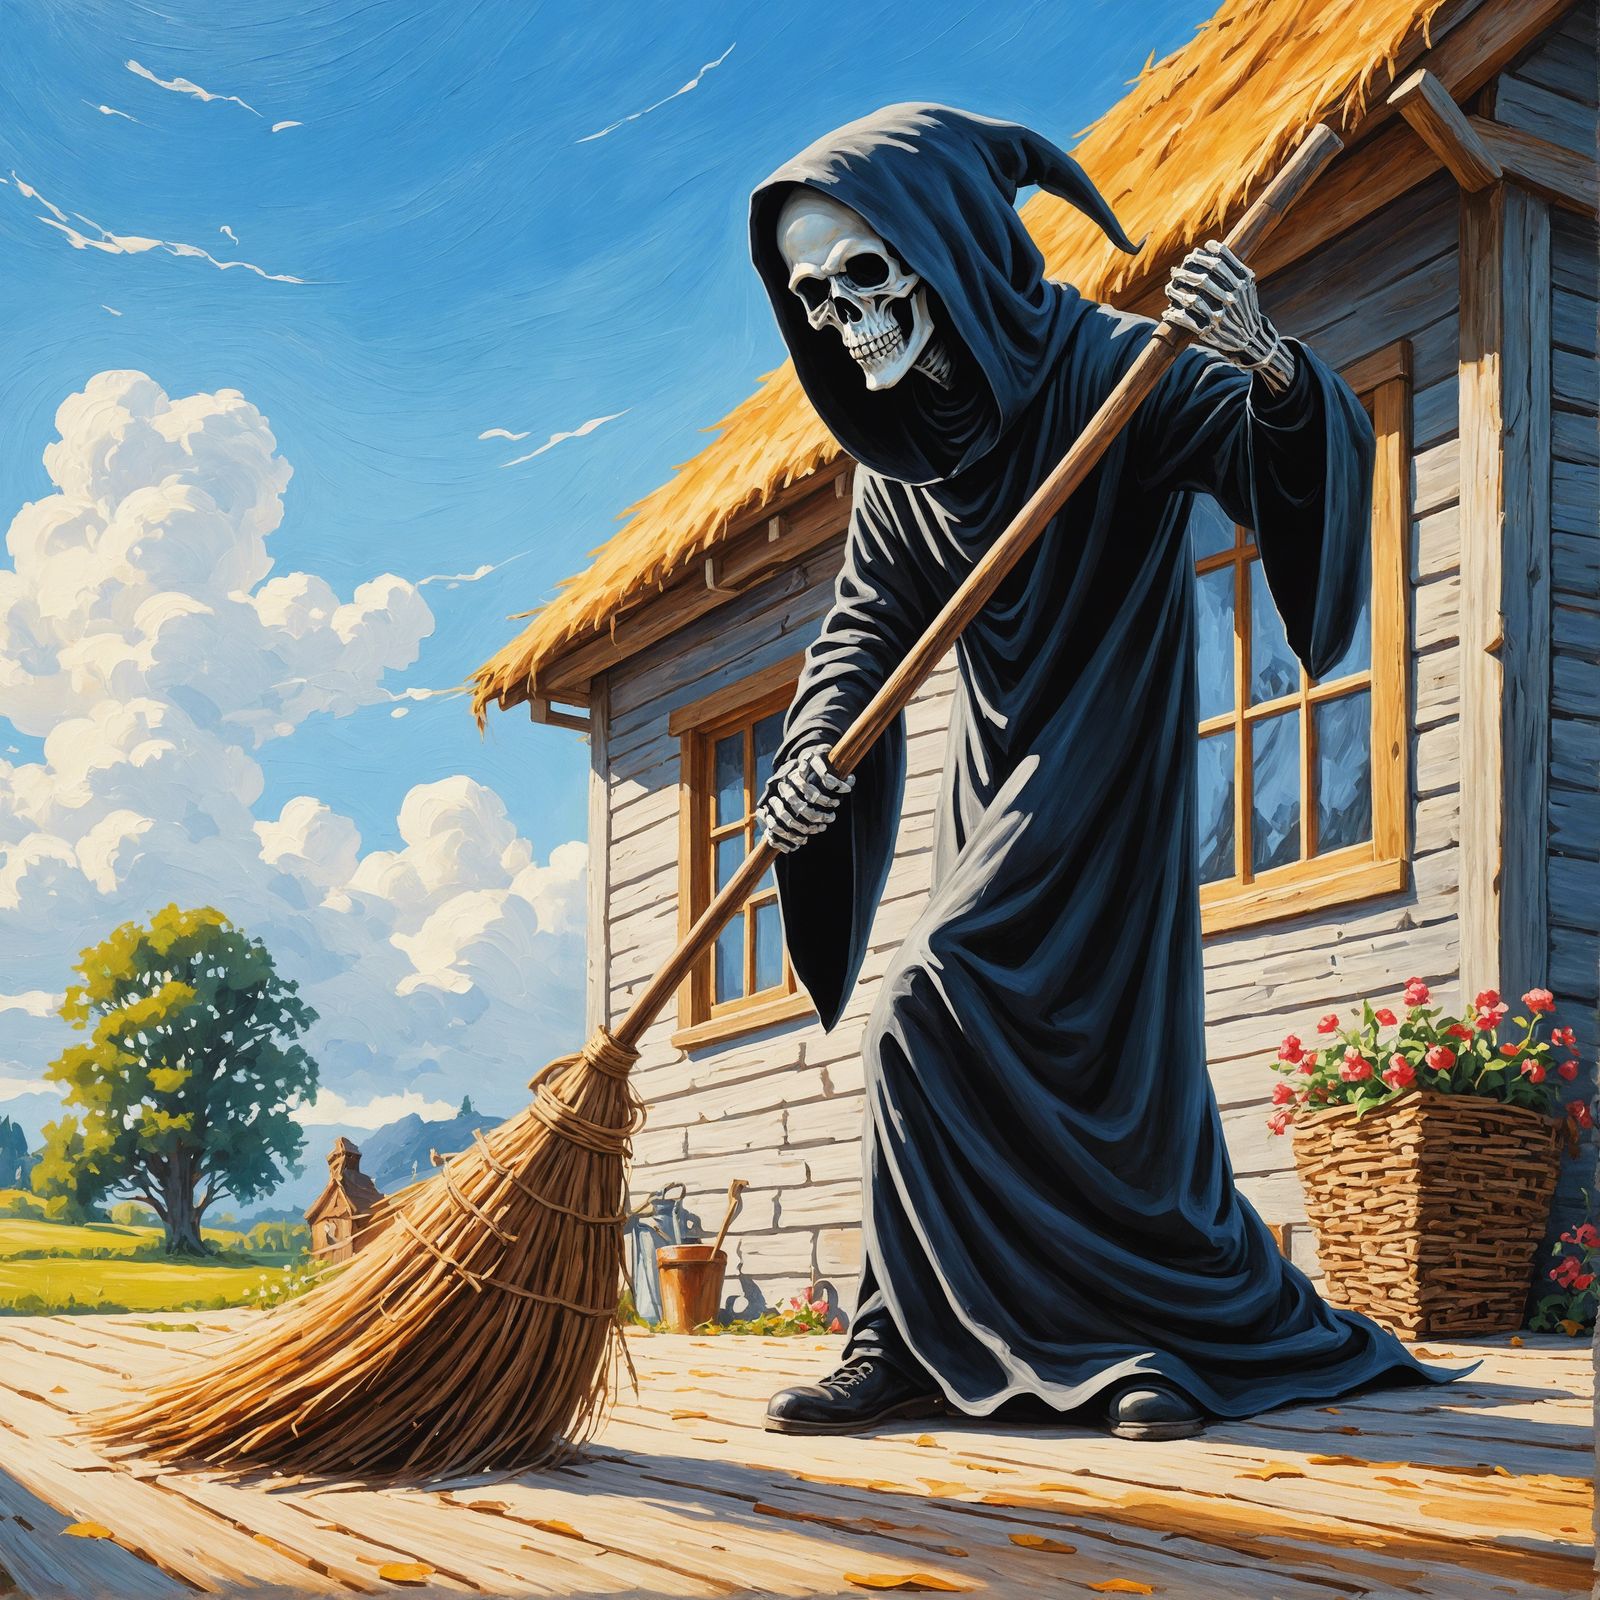 The Grim Sweeper